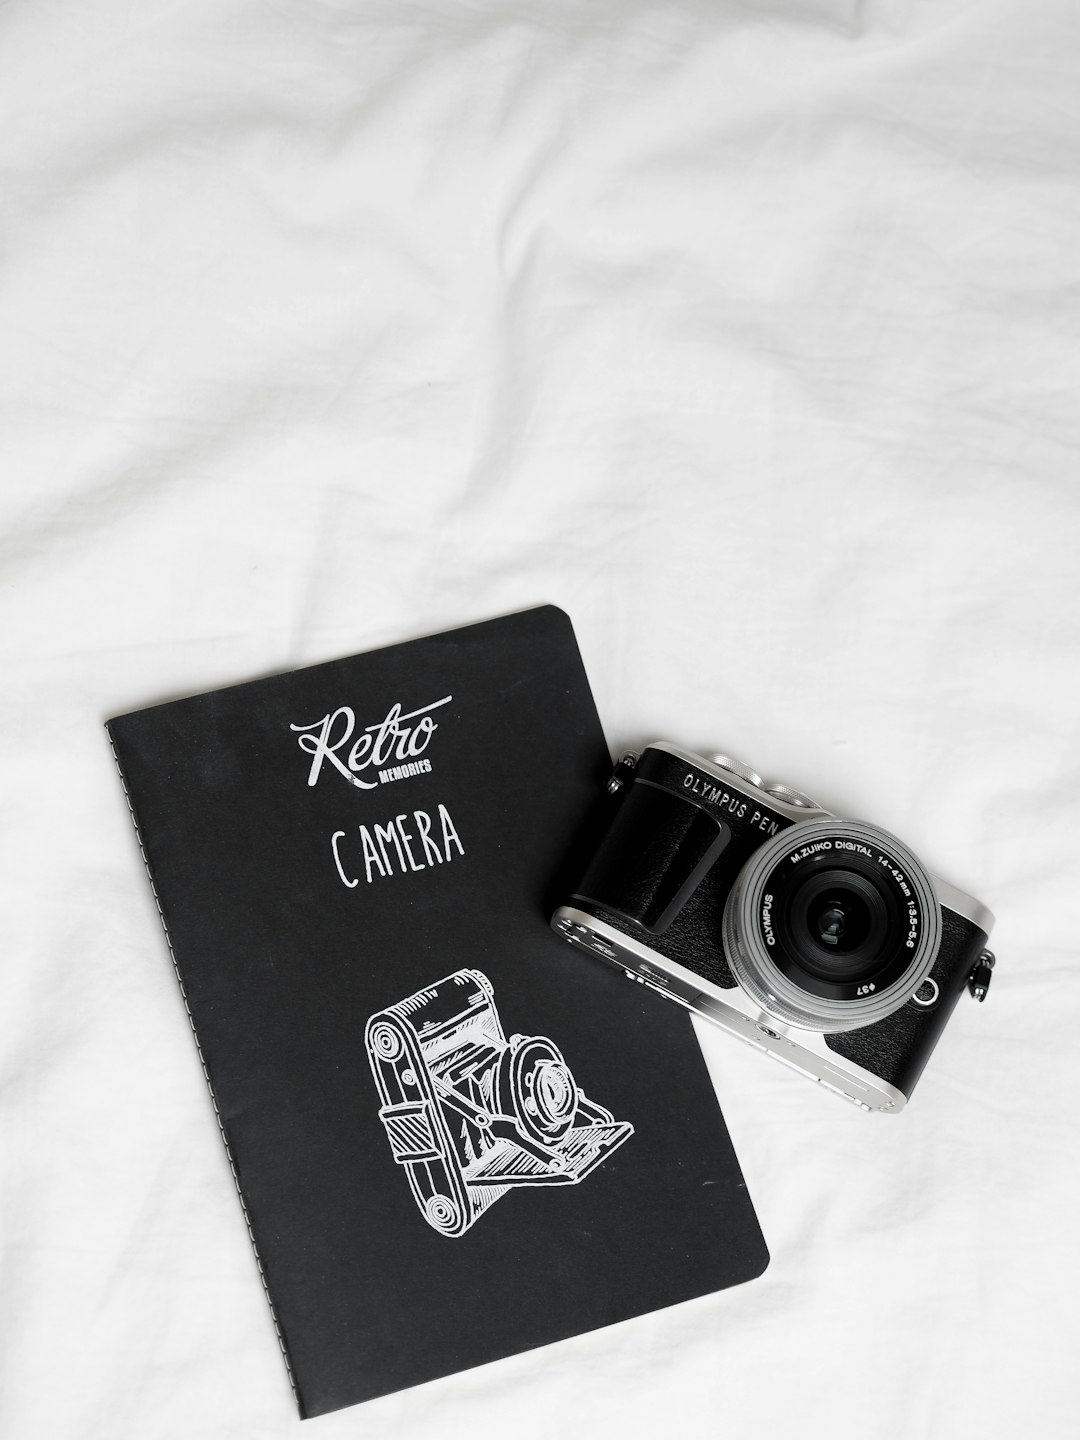 black and silver camera on black book